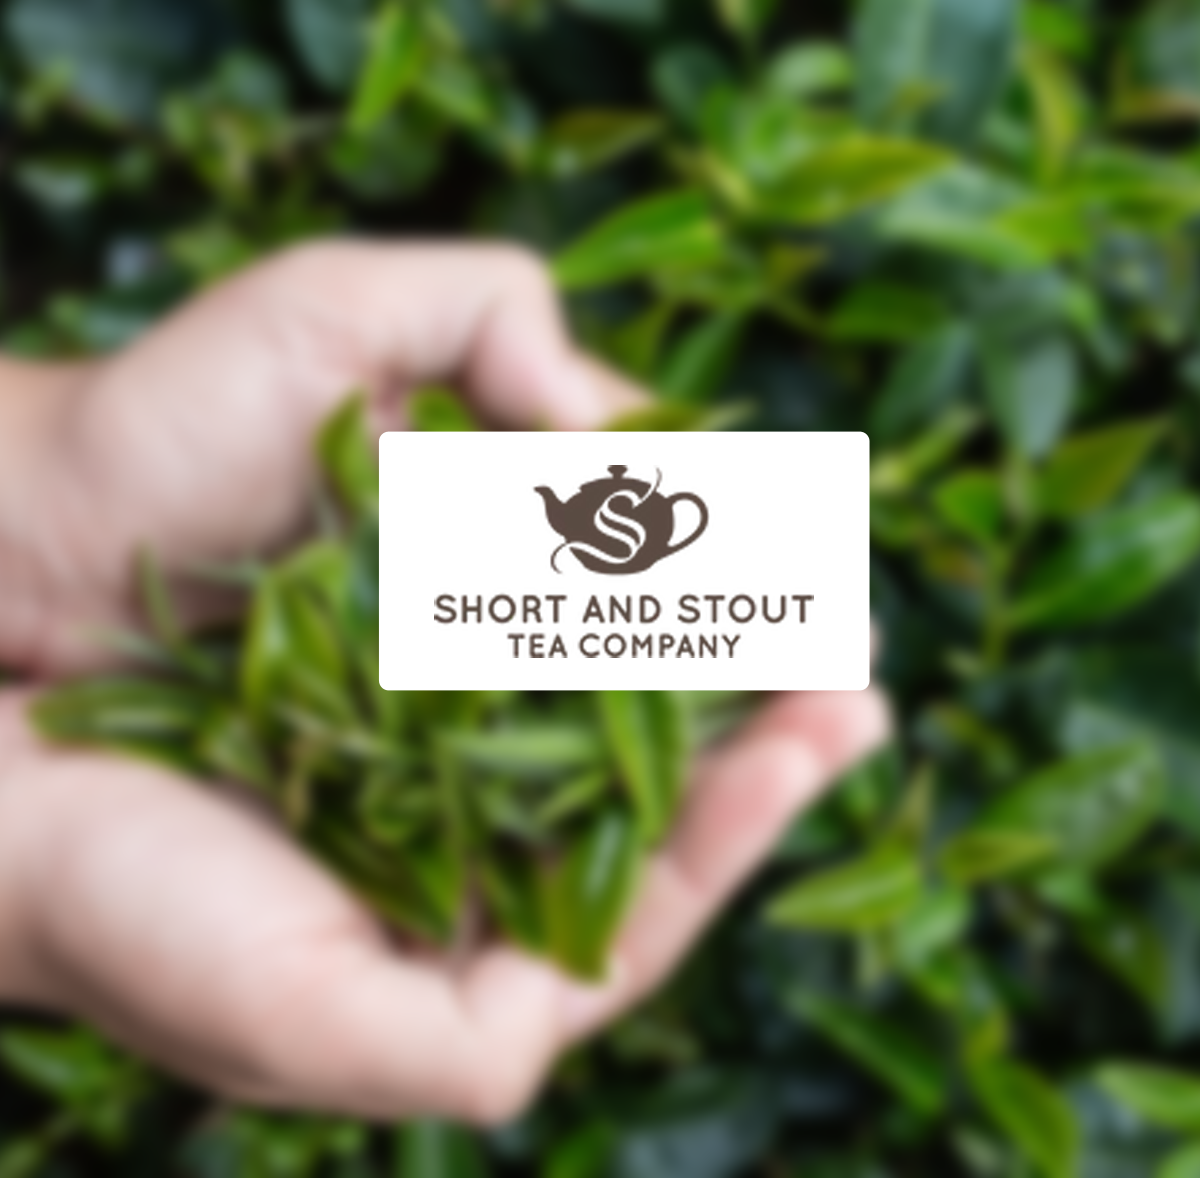 What’s Brewing at Short and Stout in February